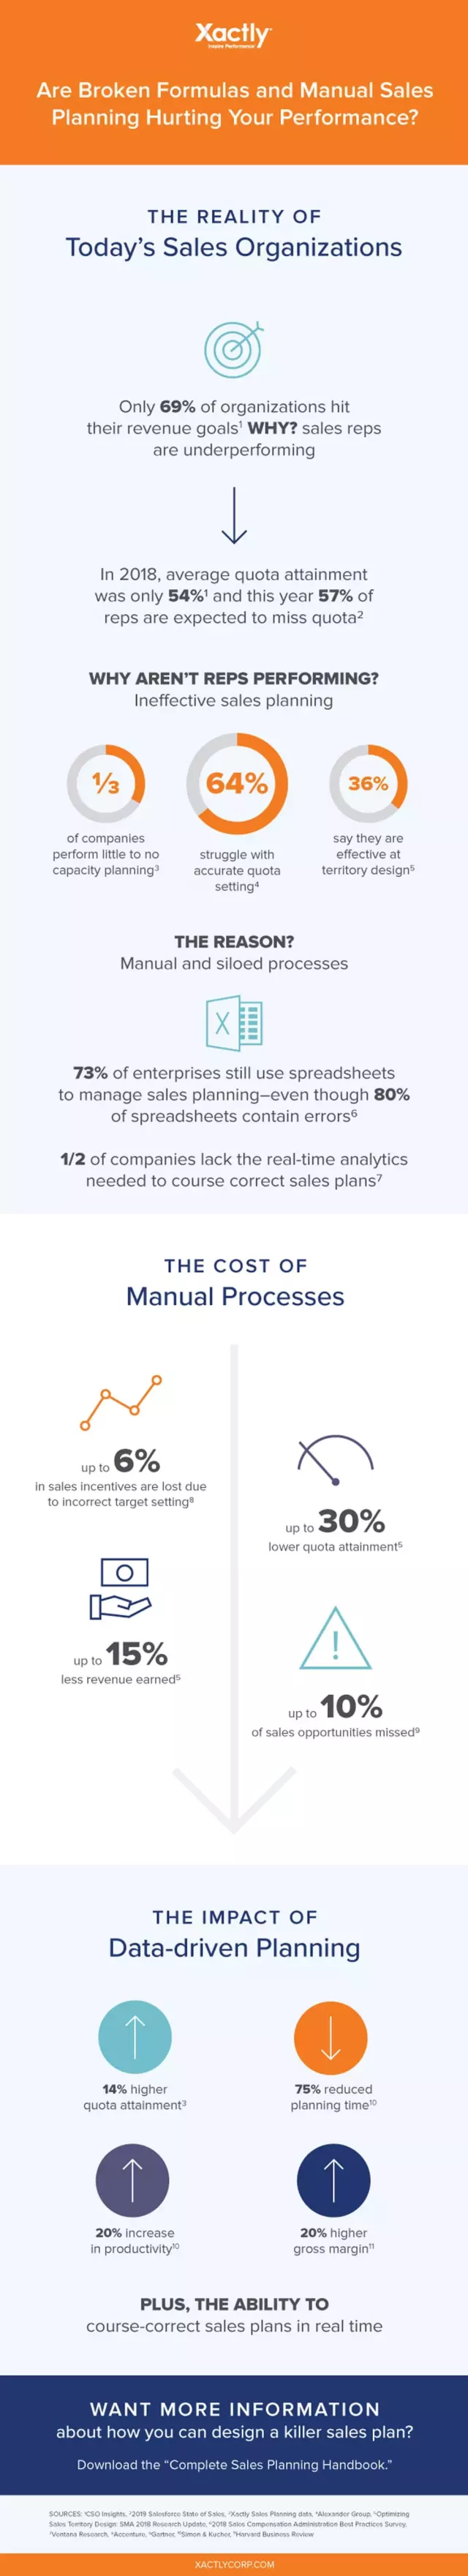 Are Broken Formulas and Manual Sales Planning Hurting Your Performance? Infographic